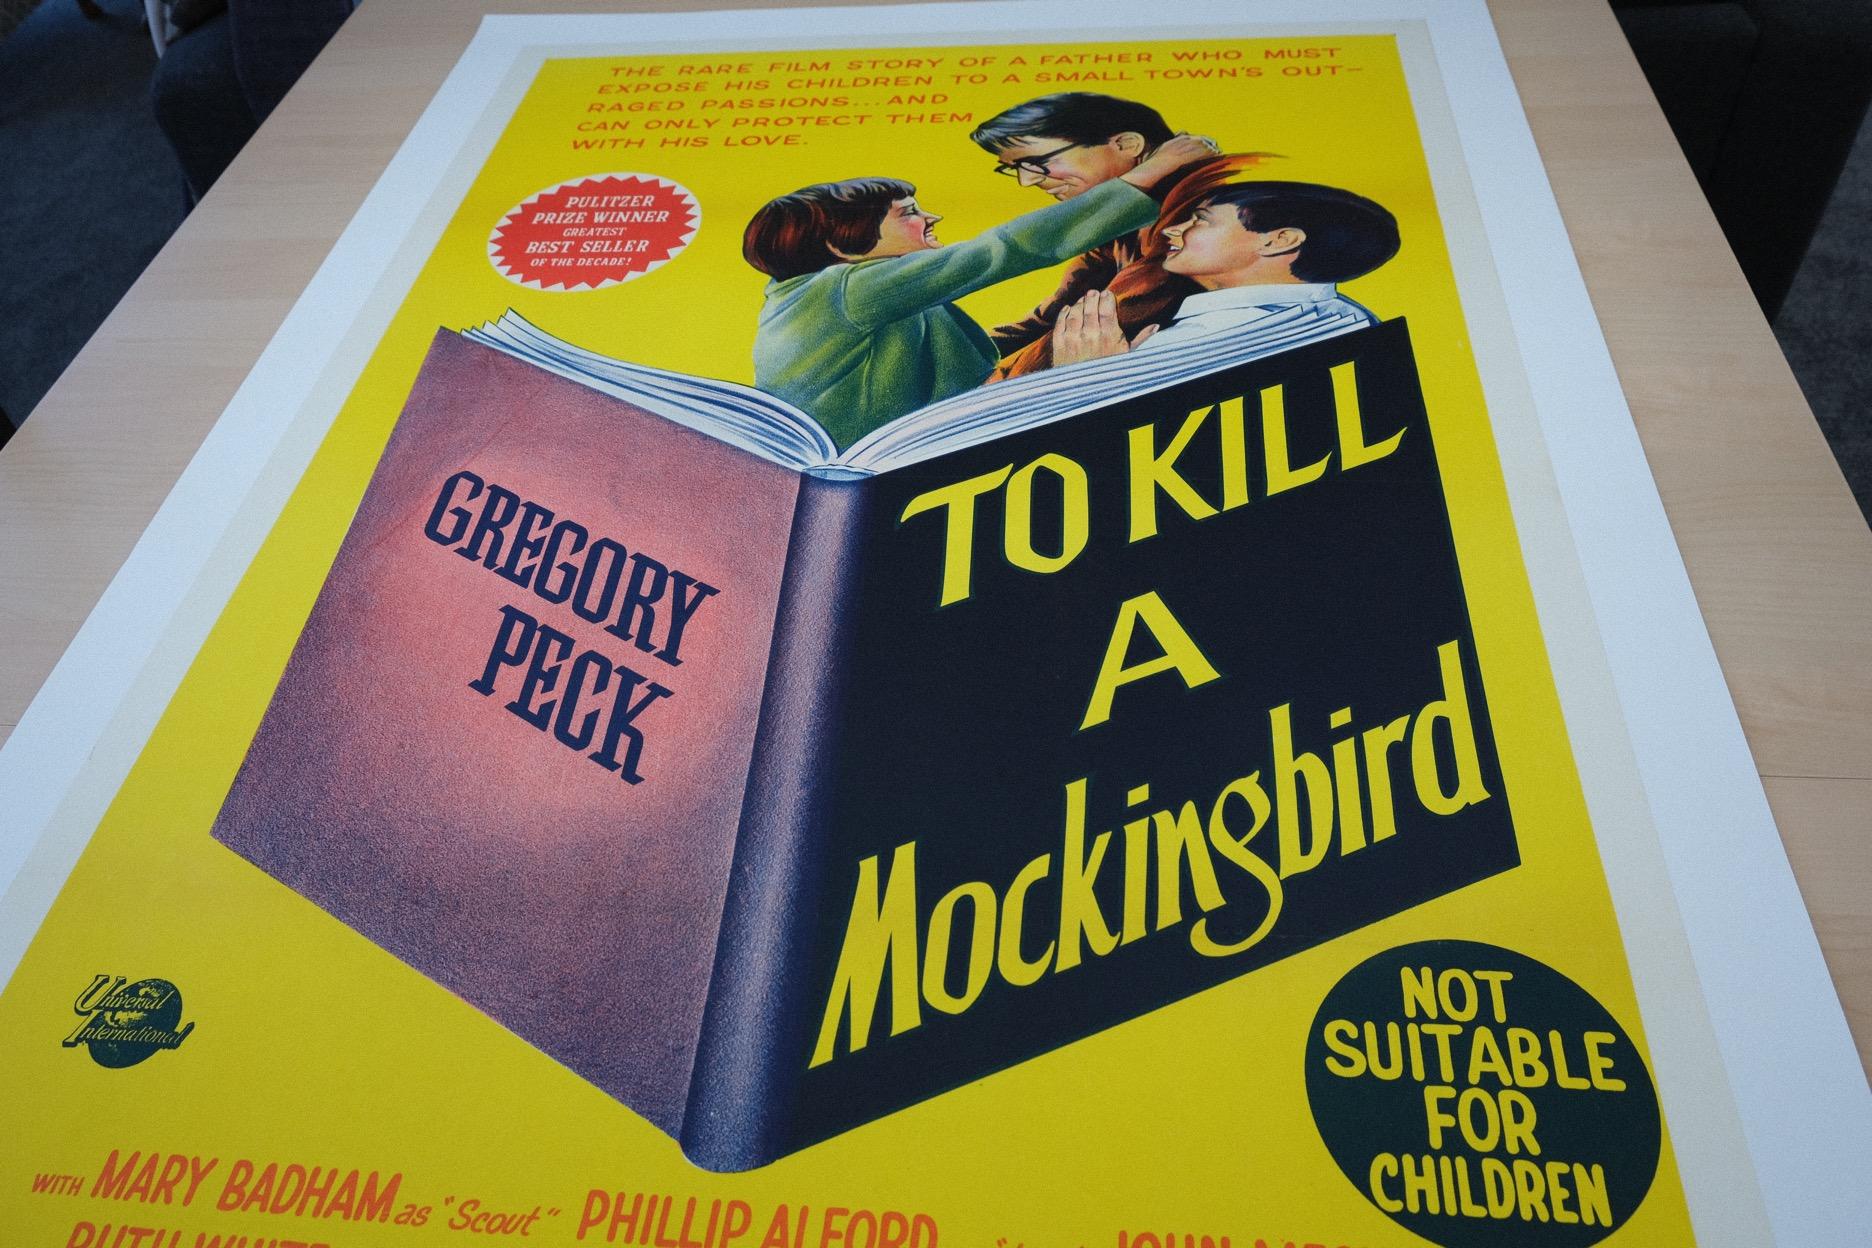 Size: One-Sheet

Condition: Mint

Dimensions: 1150mm x 780mm (inc. Linen Border)

Type: Original Lithographic Print - Linen Backed

Year: 1962

Details: One of the most beloved films of the early 1960’s, this To Kill A Mockingbird poster